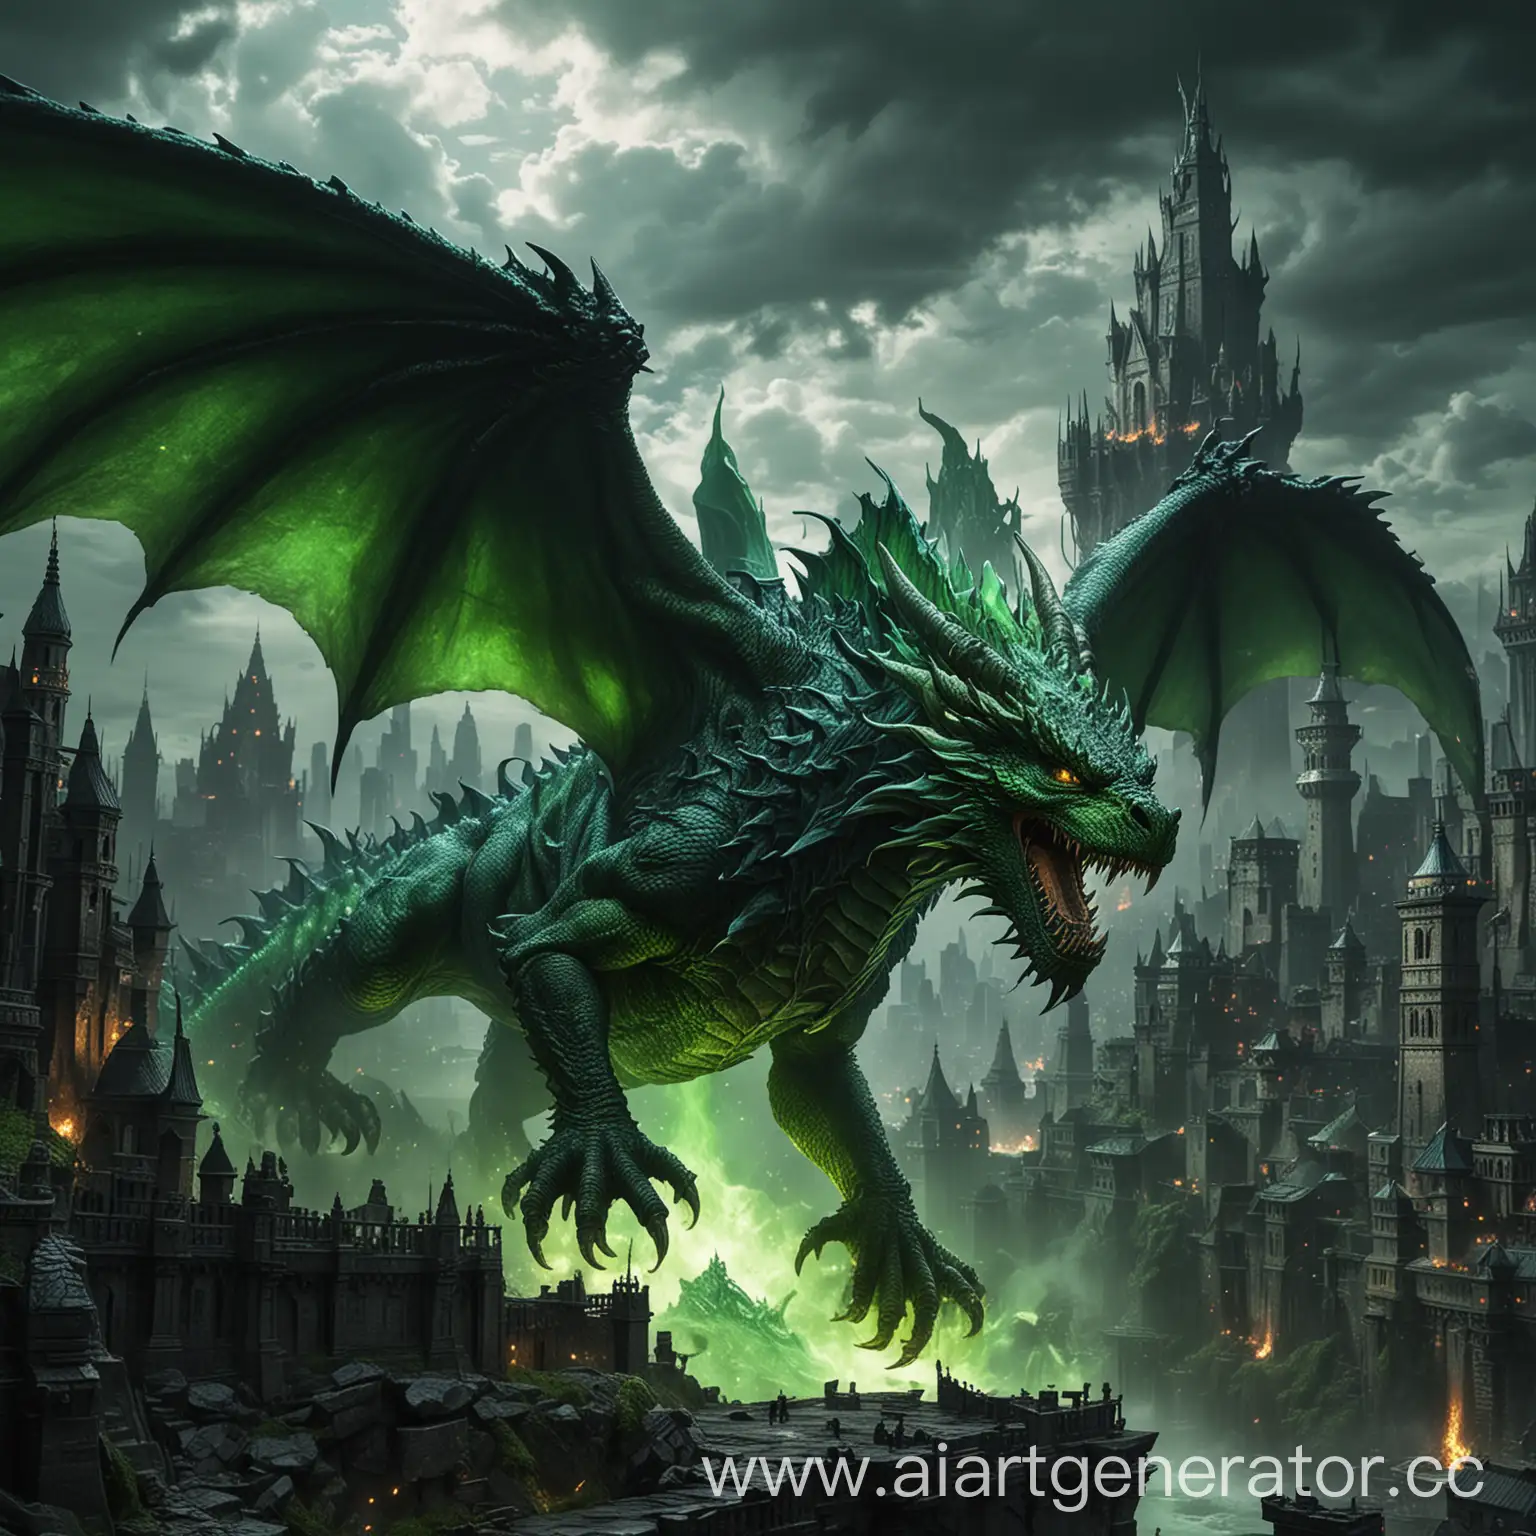 Huge majestic green dragon, demonic toxic dragon, scales, acid green color, black horns, glowing eyes. The dragon towers over the city, streams of acid flow from the dragon's mouth, its huge wings cover the sky. City guards run away from the acid dragon